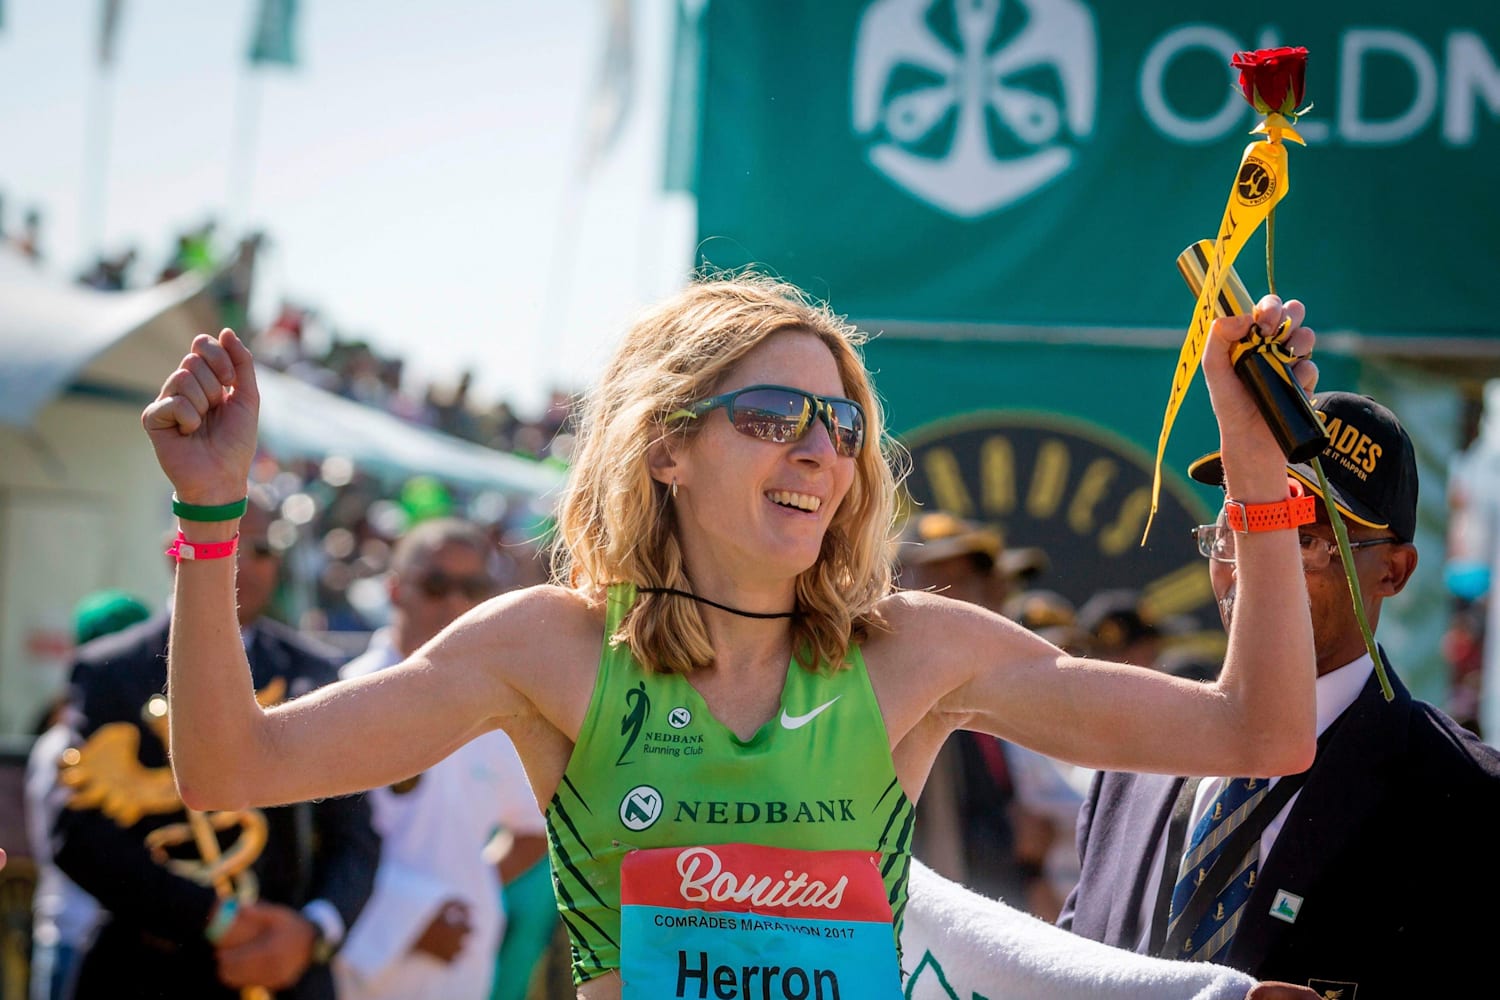 Camille Herron Get to know the American ultrarunner